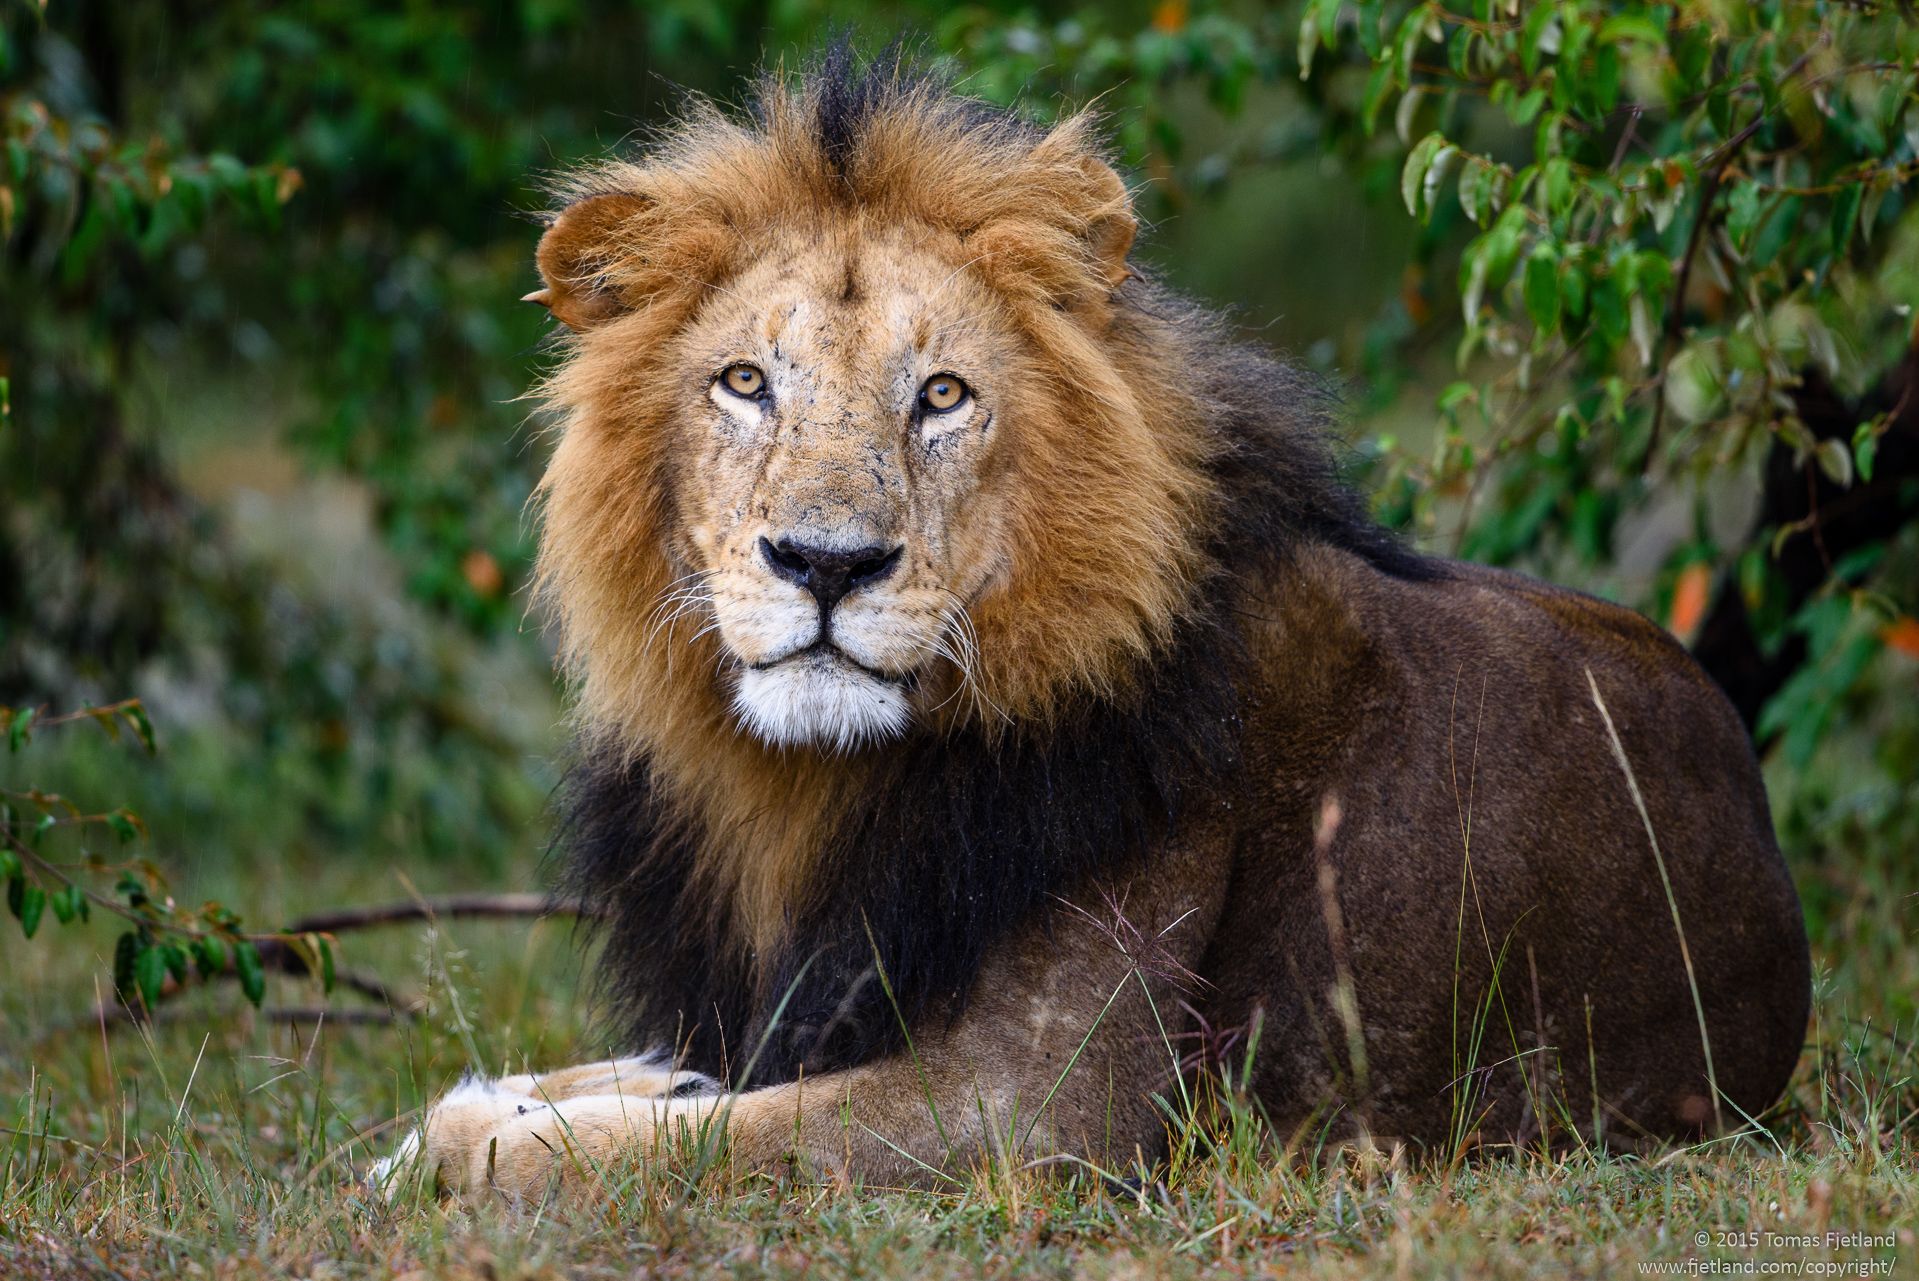 Somehow you rarely find a happy looking cat in the rain. This is also true for this magnificent male lion